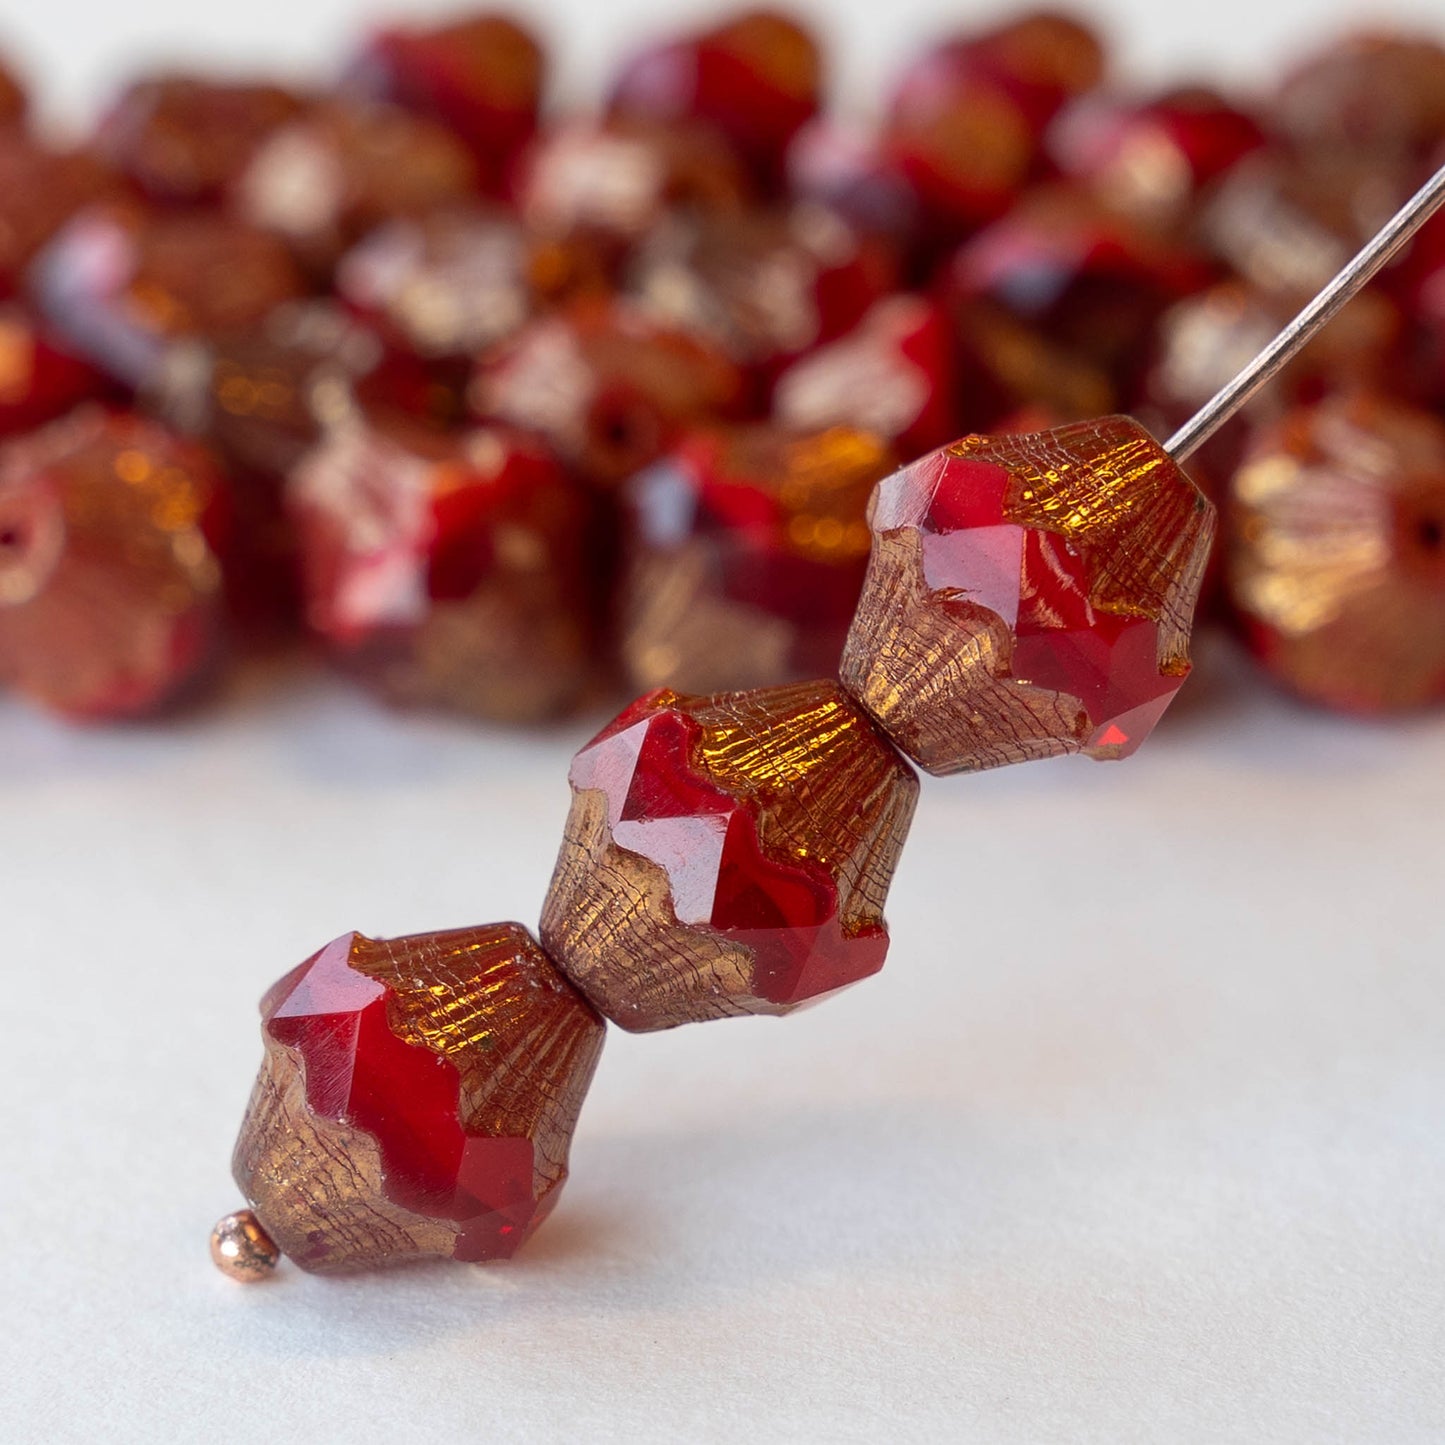 11x10mm Bicone Beads - Red Mix with Copper - 6 Beads